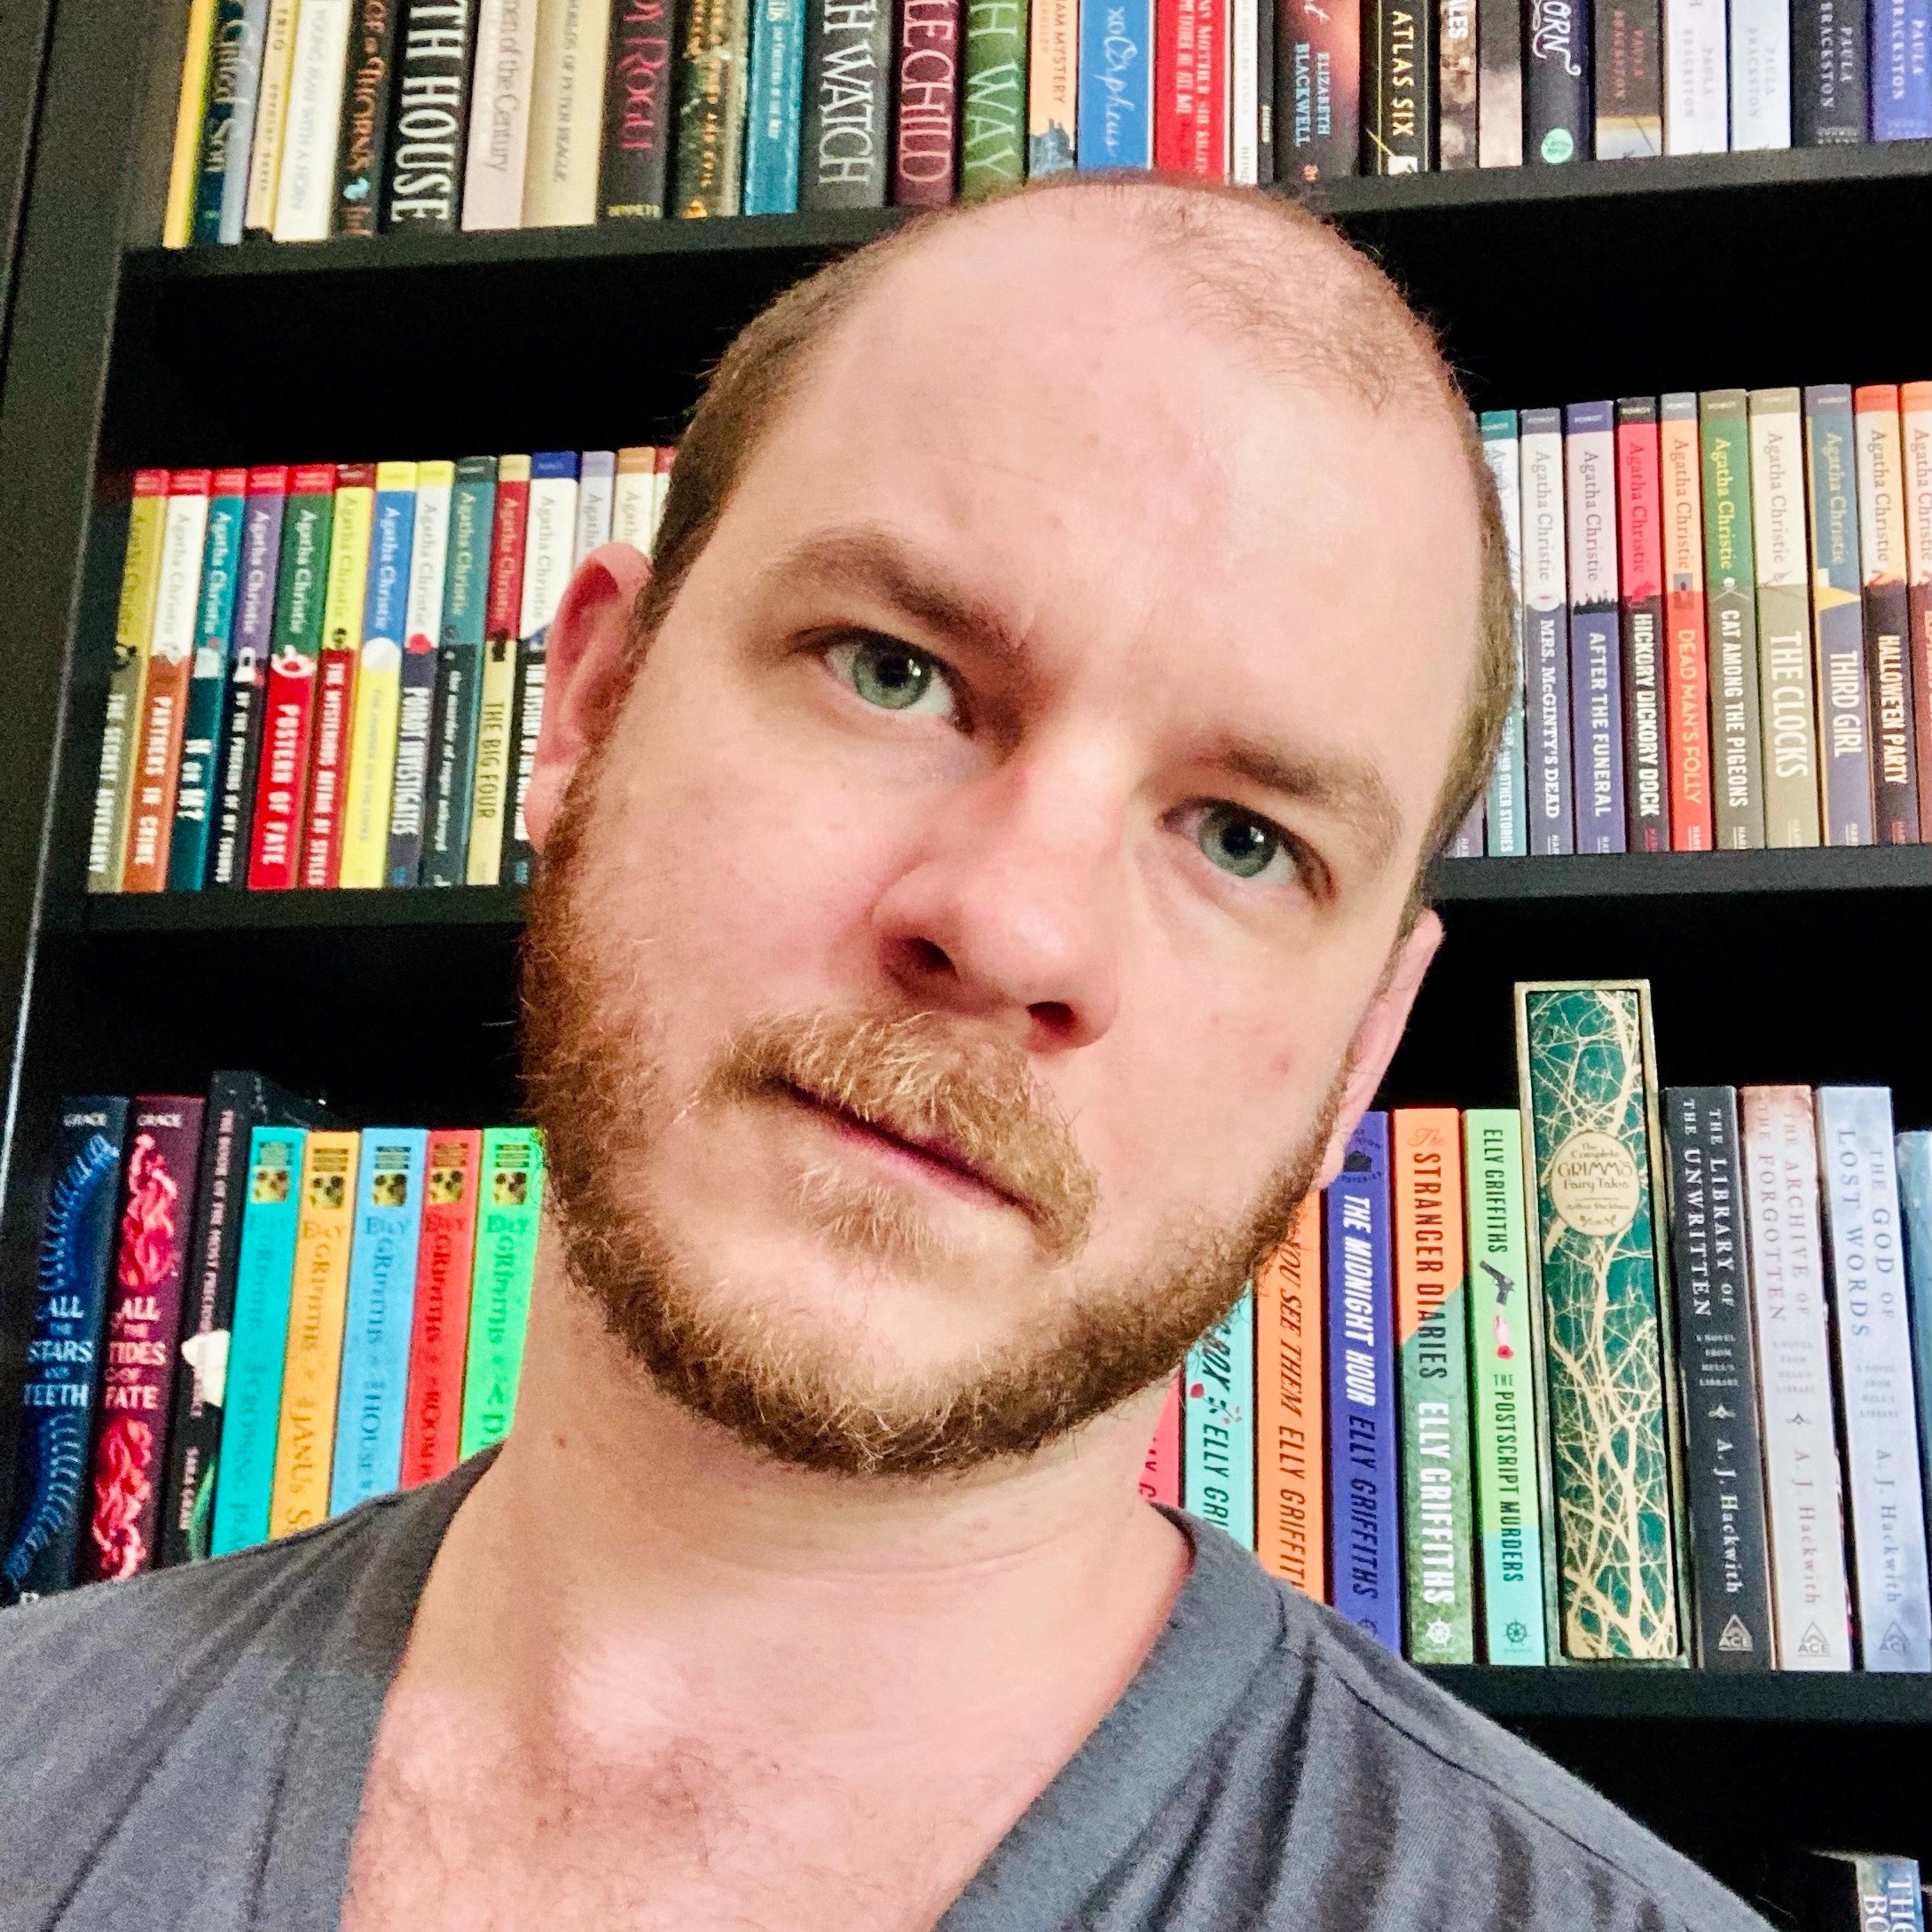 A man in a gray shirt with books in the background